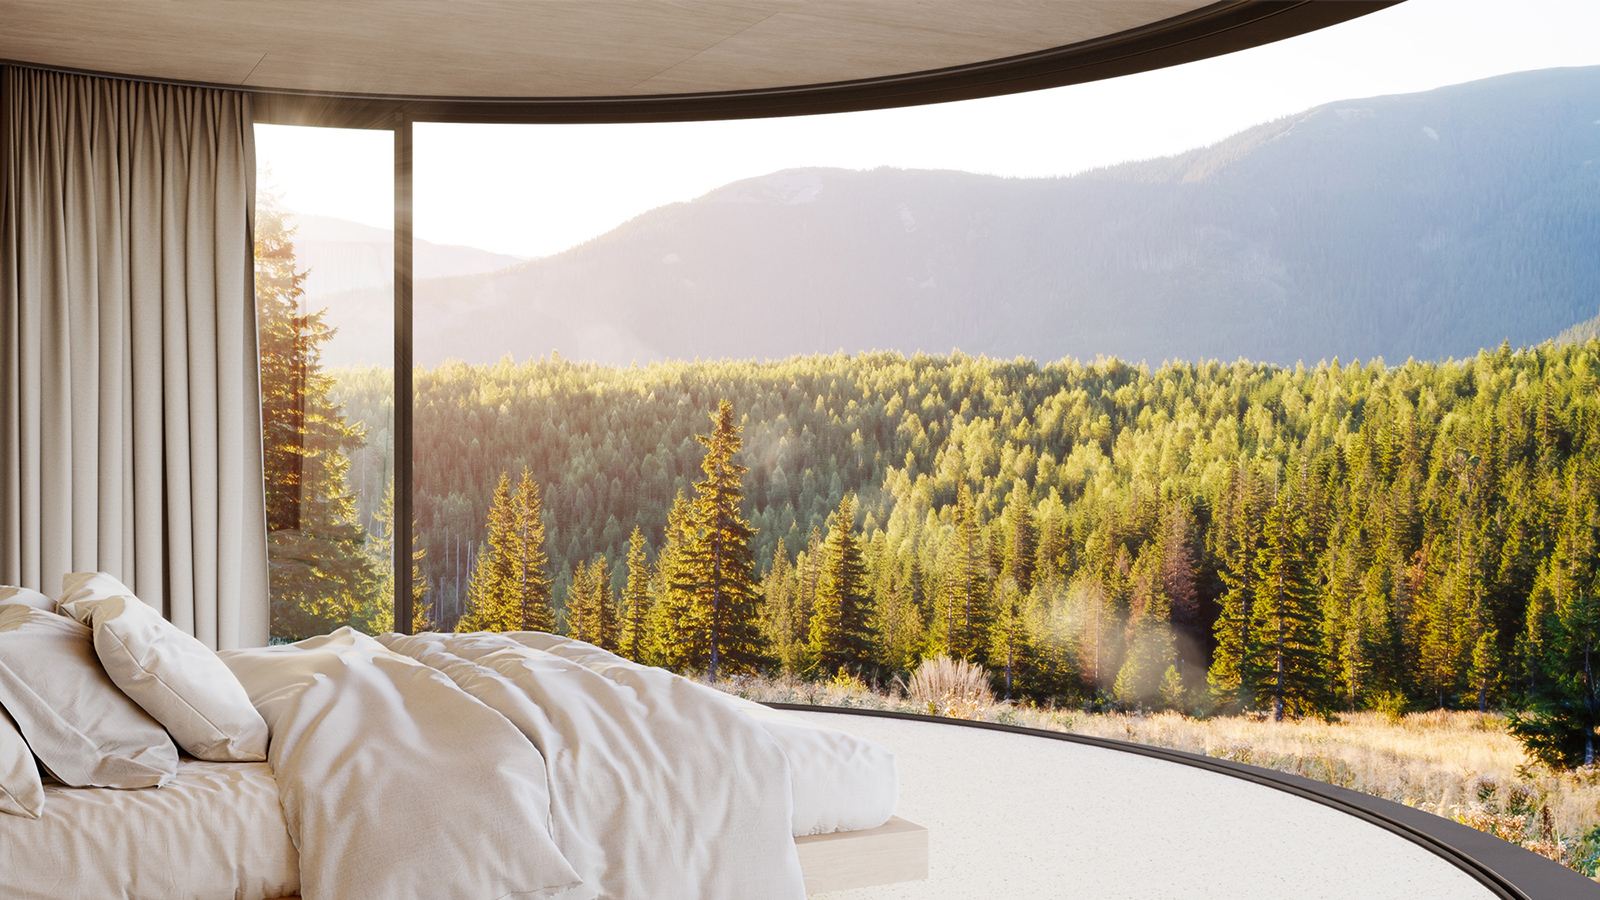 This round cabin opens straight onto the landscape